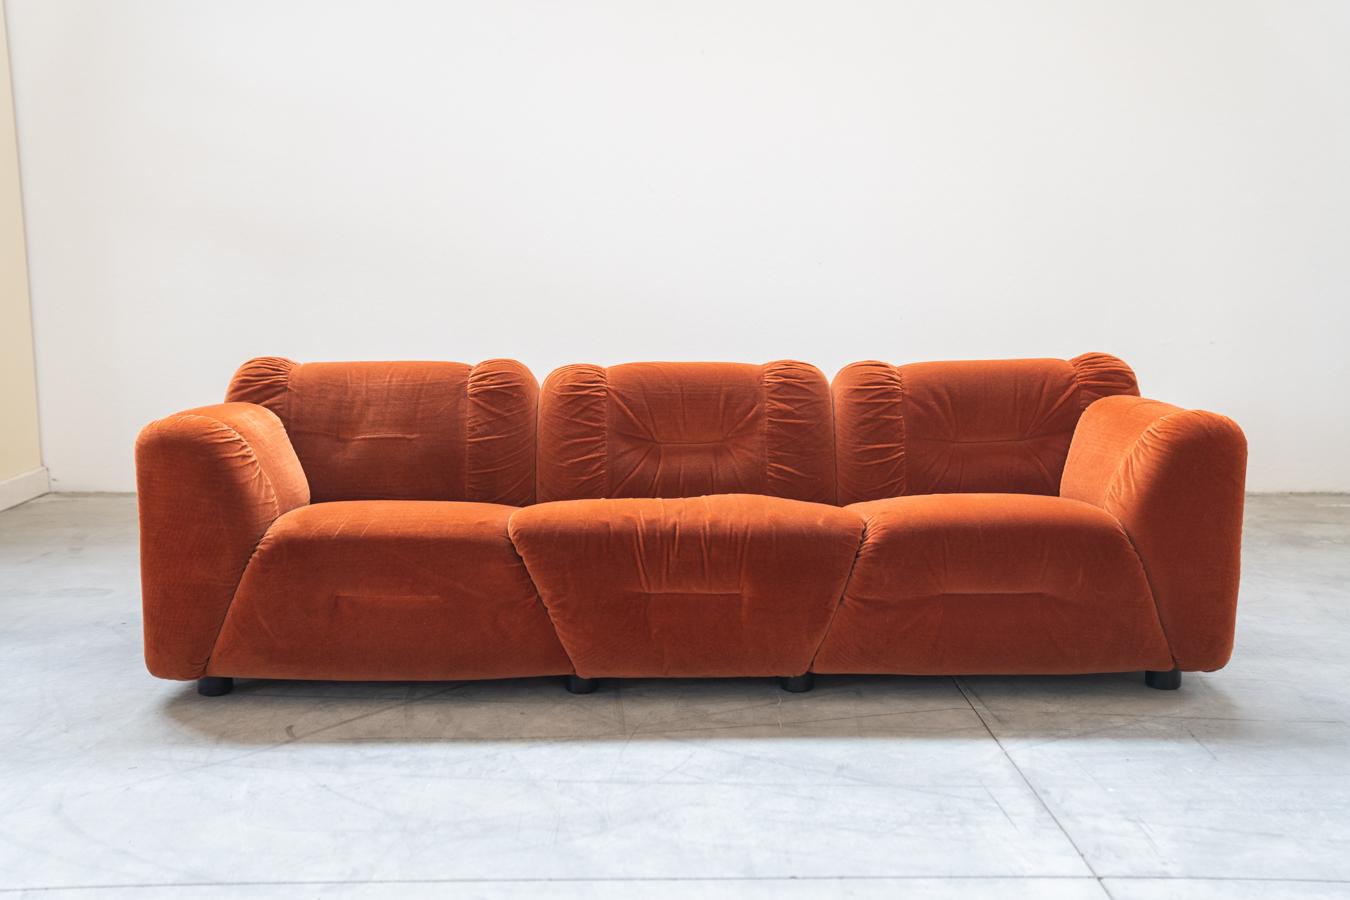 Orange chenille sofas, two and three seater, set of 2, 1970s
Wooden frame, plastic feet. The backrest of both sofas  	has some slight signs of wear due to time.
MEASUREMENTS	3-seater sofa: H65 x W230 x D90 - Hseat 43cm
	2-seater sofa: H65 x L190 x